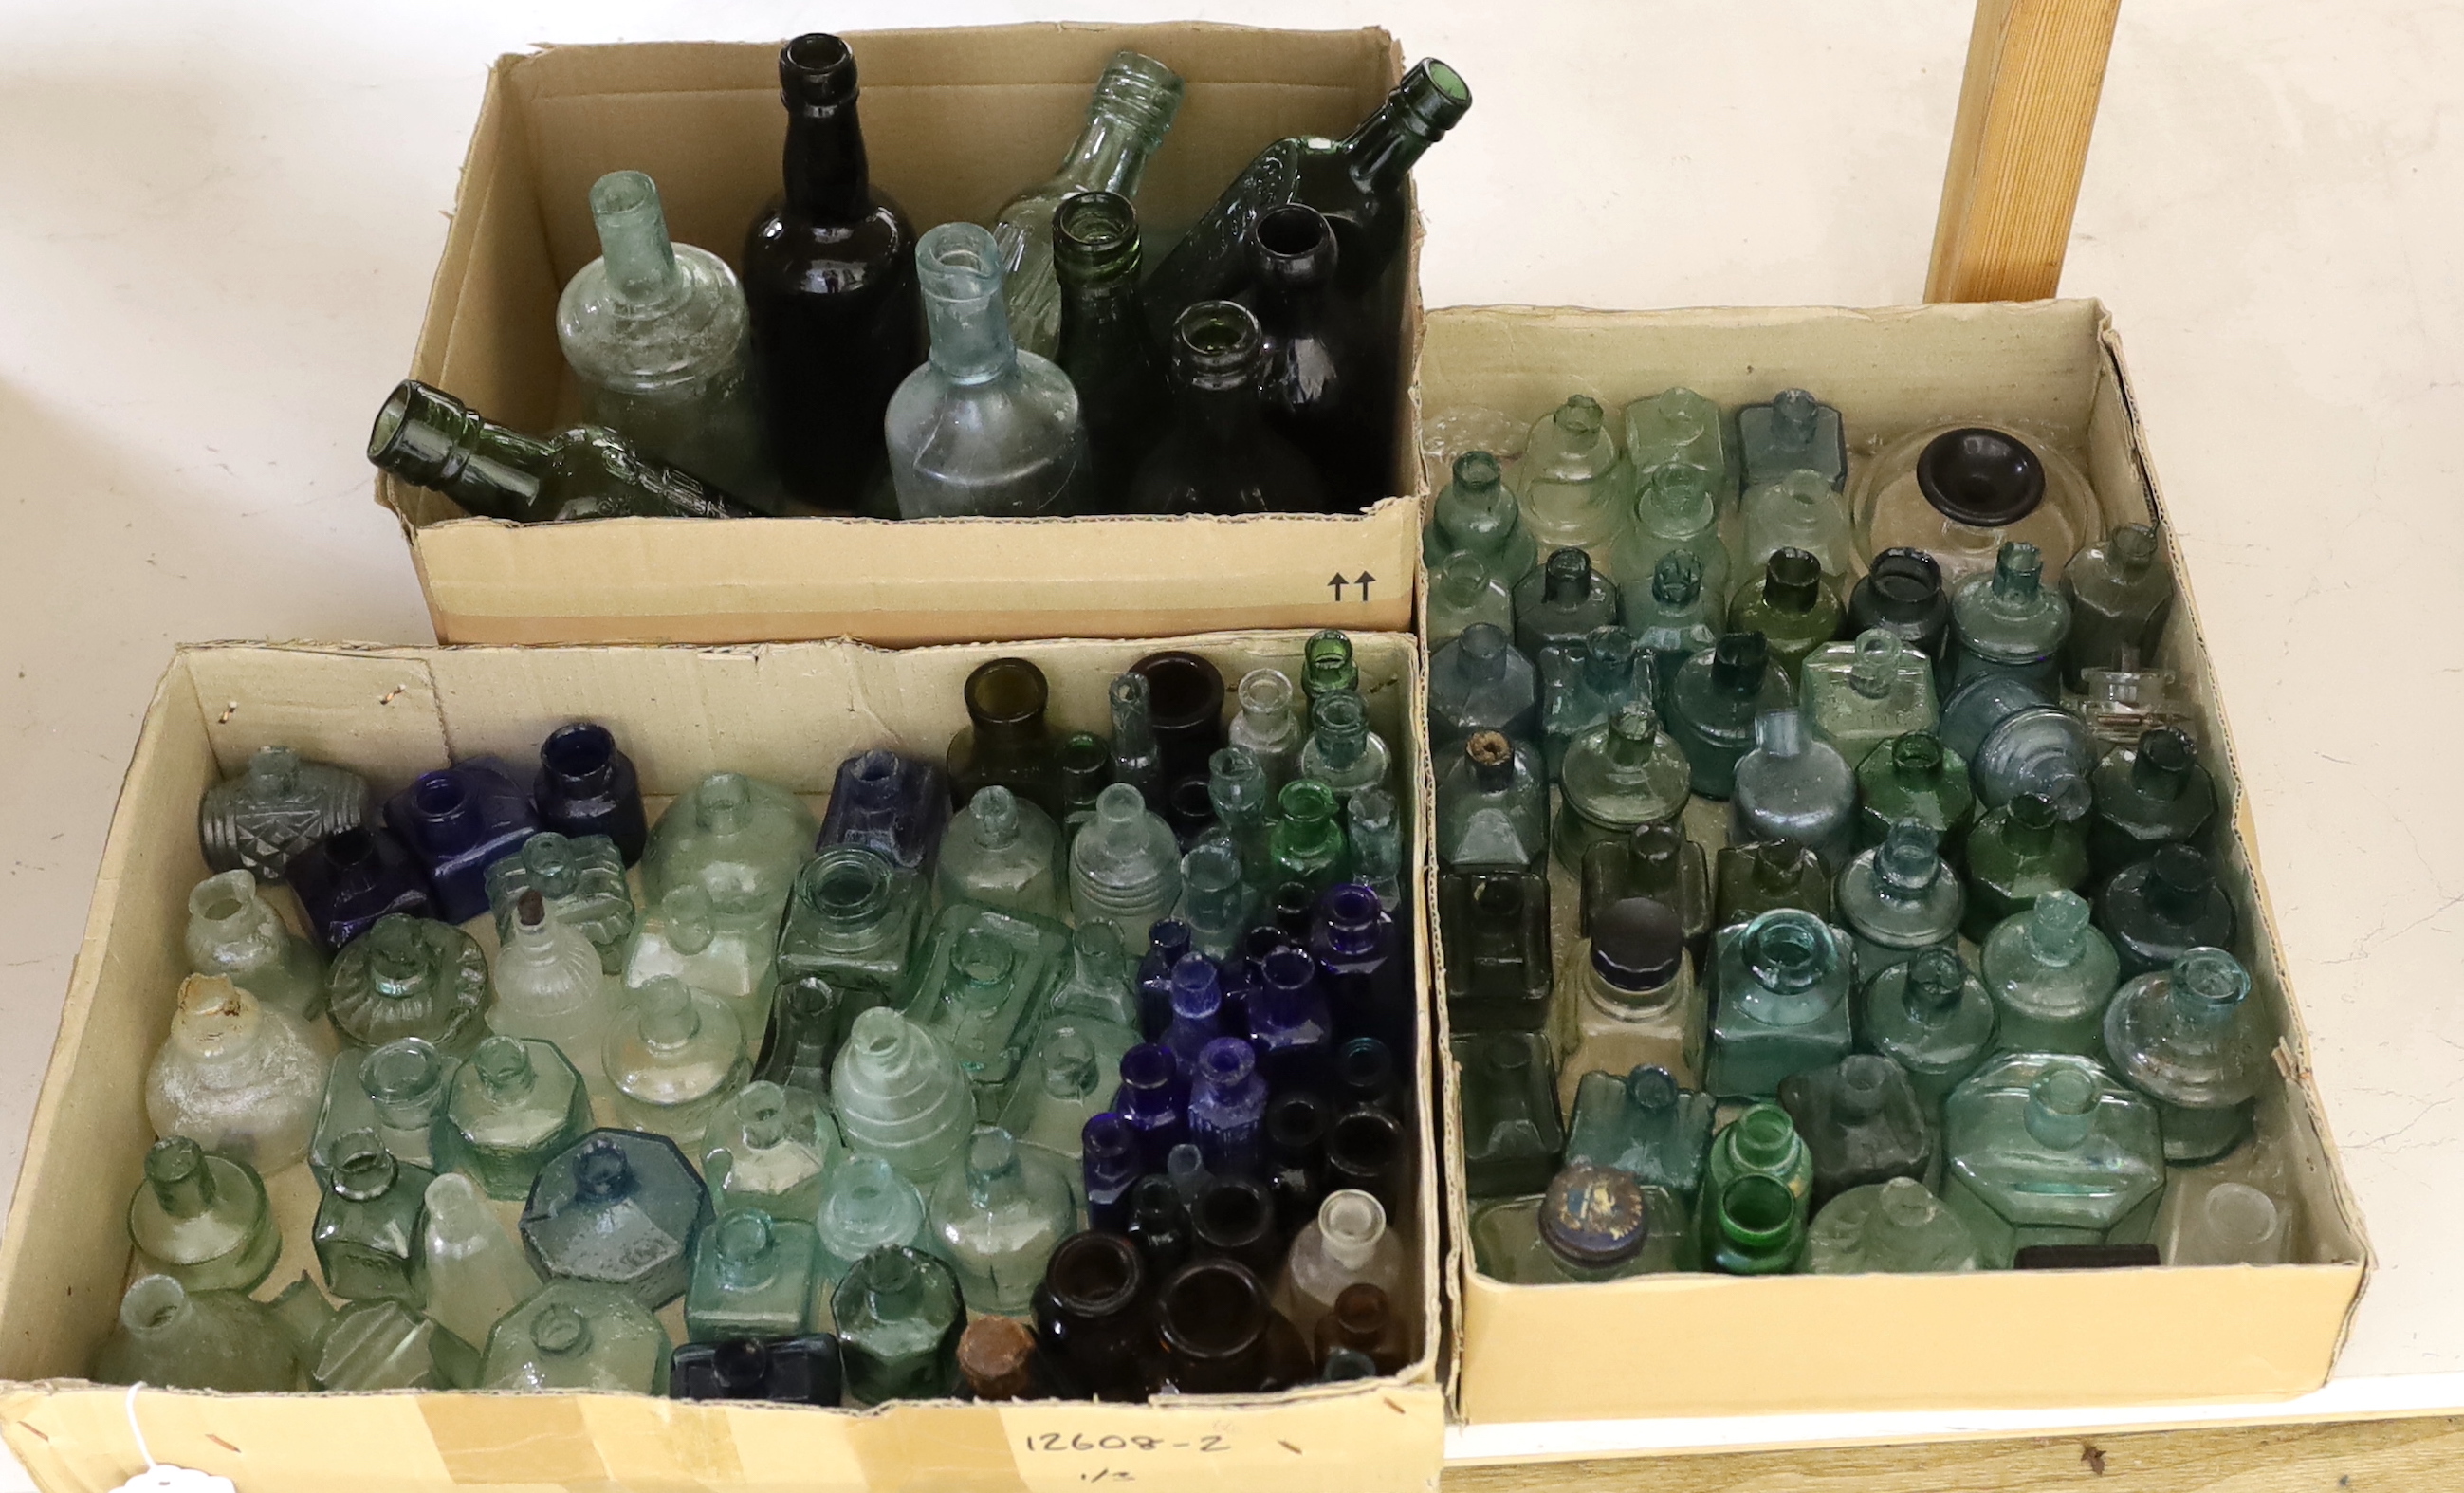 A collection of late 19th/early 20th century glass ink bottles, drink bottles and sauce bottles, brand names and advertising moulded into the glass on a number of examples, many ink bottles with pen rests moulded into th